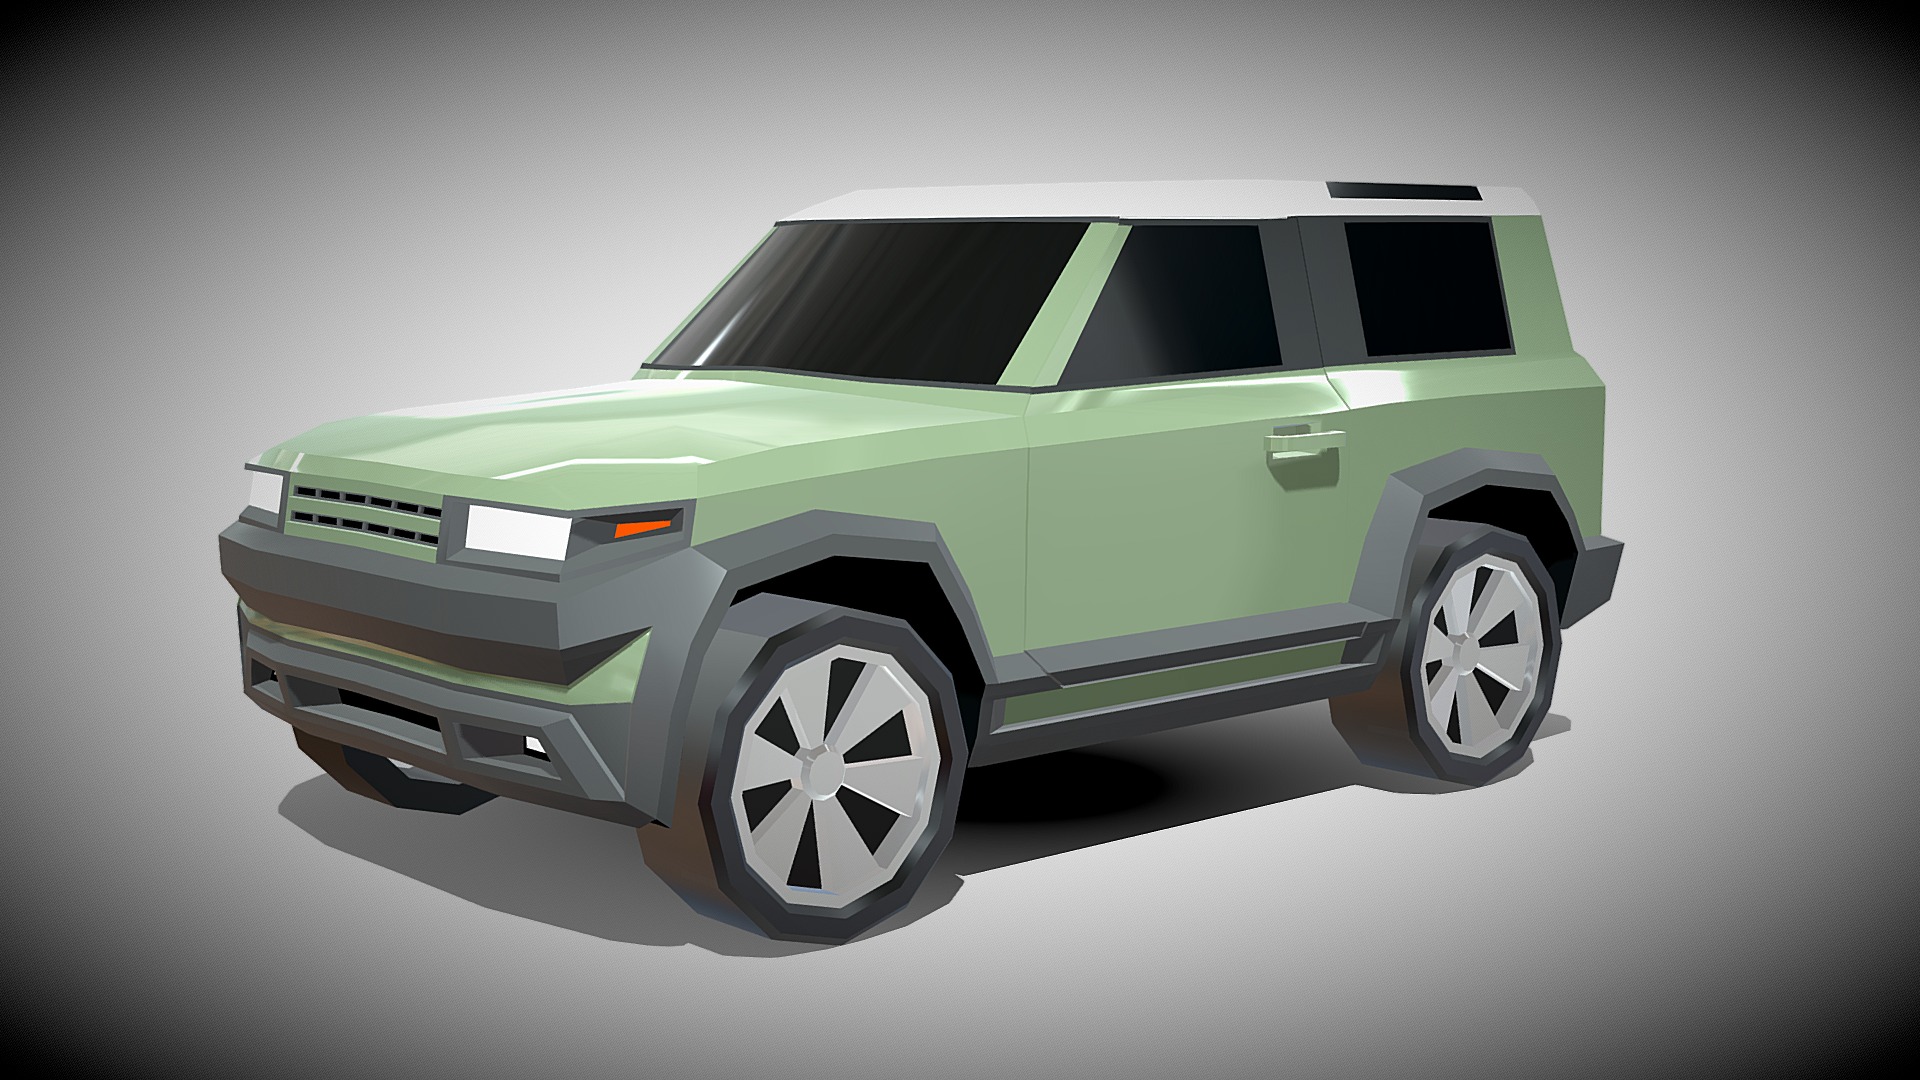 3D model Generic Land Rover - This is a 3D model of the Generic Land Rover. The 3D model is about a green and black car.